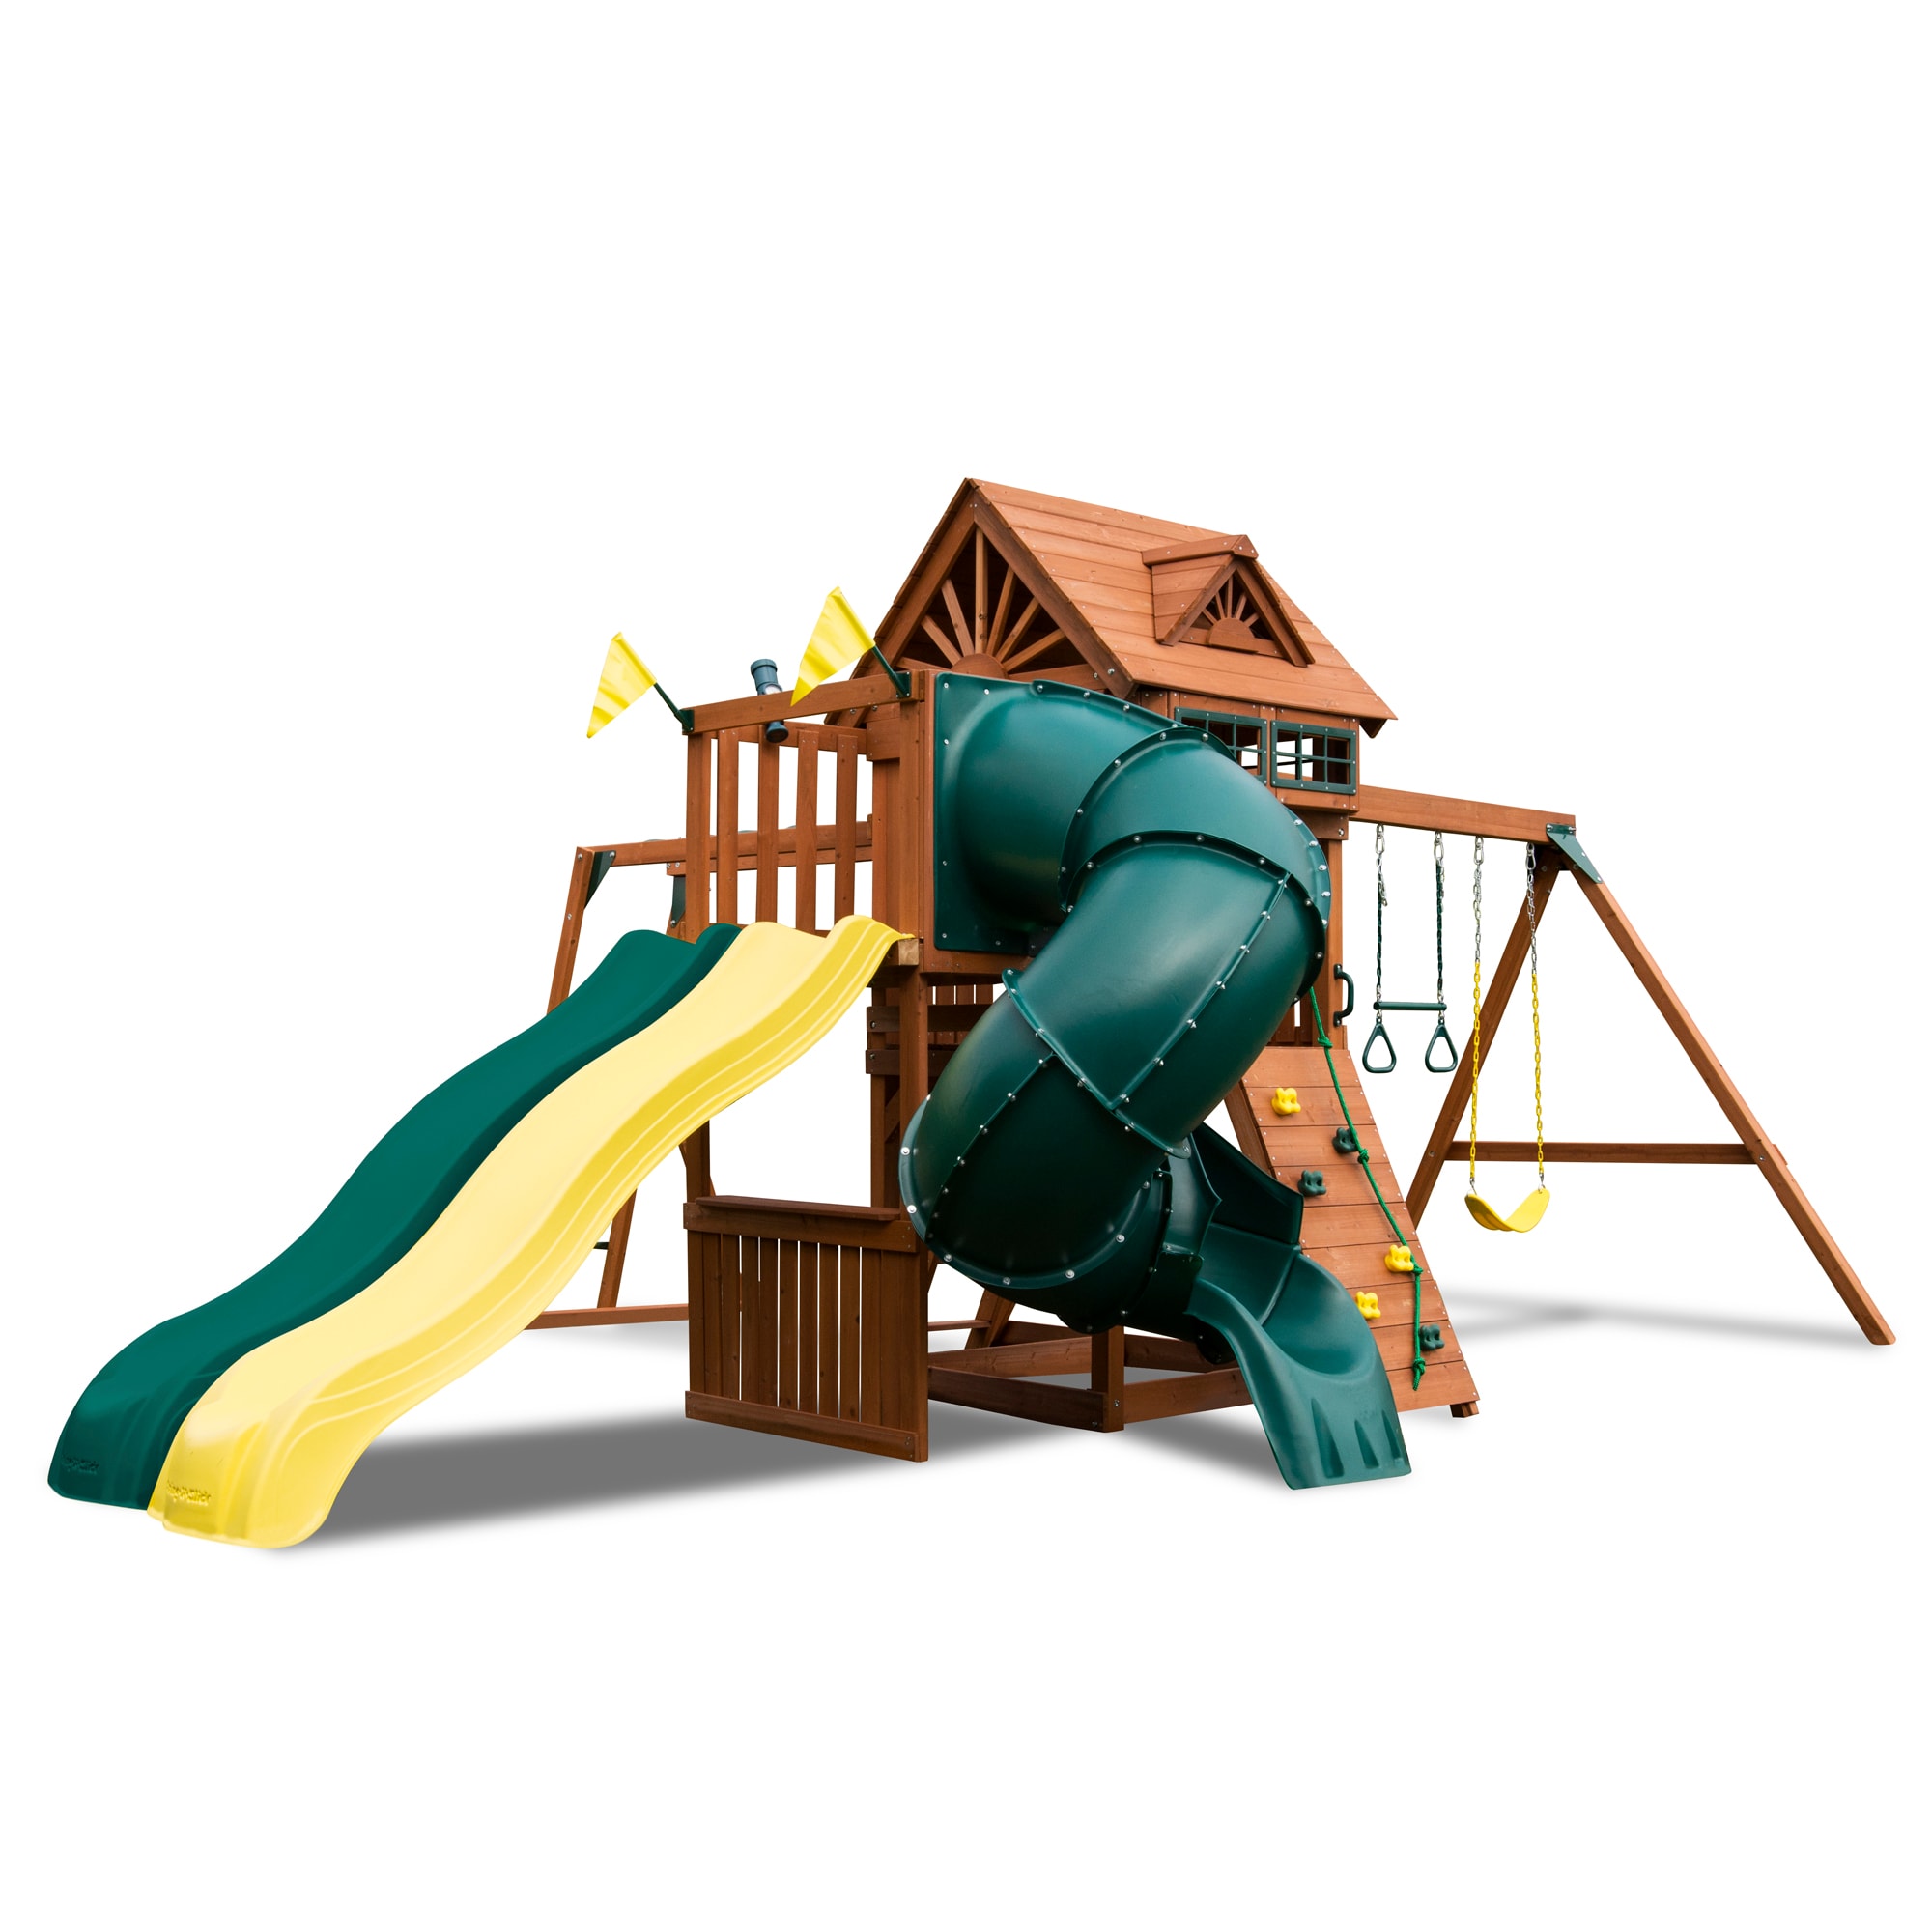 Punching Bag for Outdoor Swing Sets - Gorilla Playsets